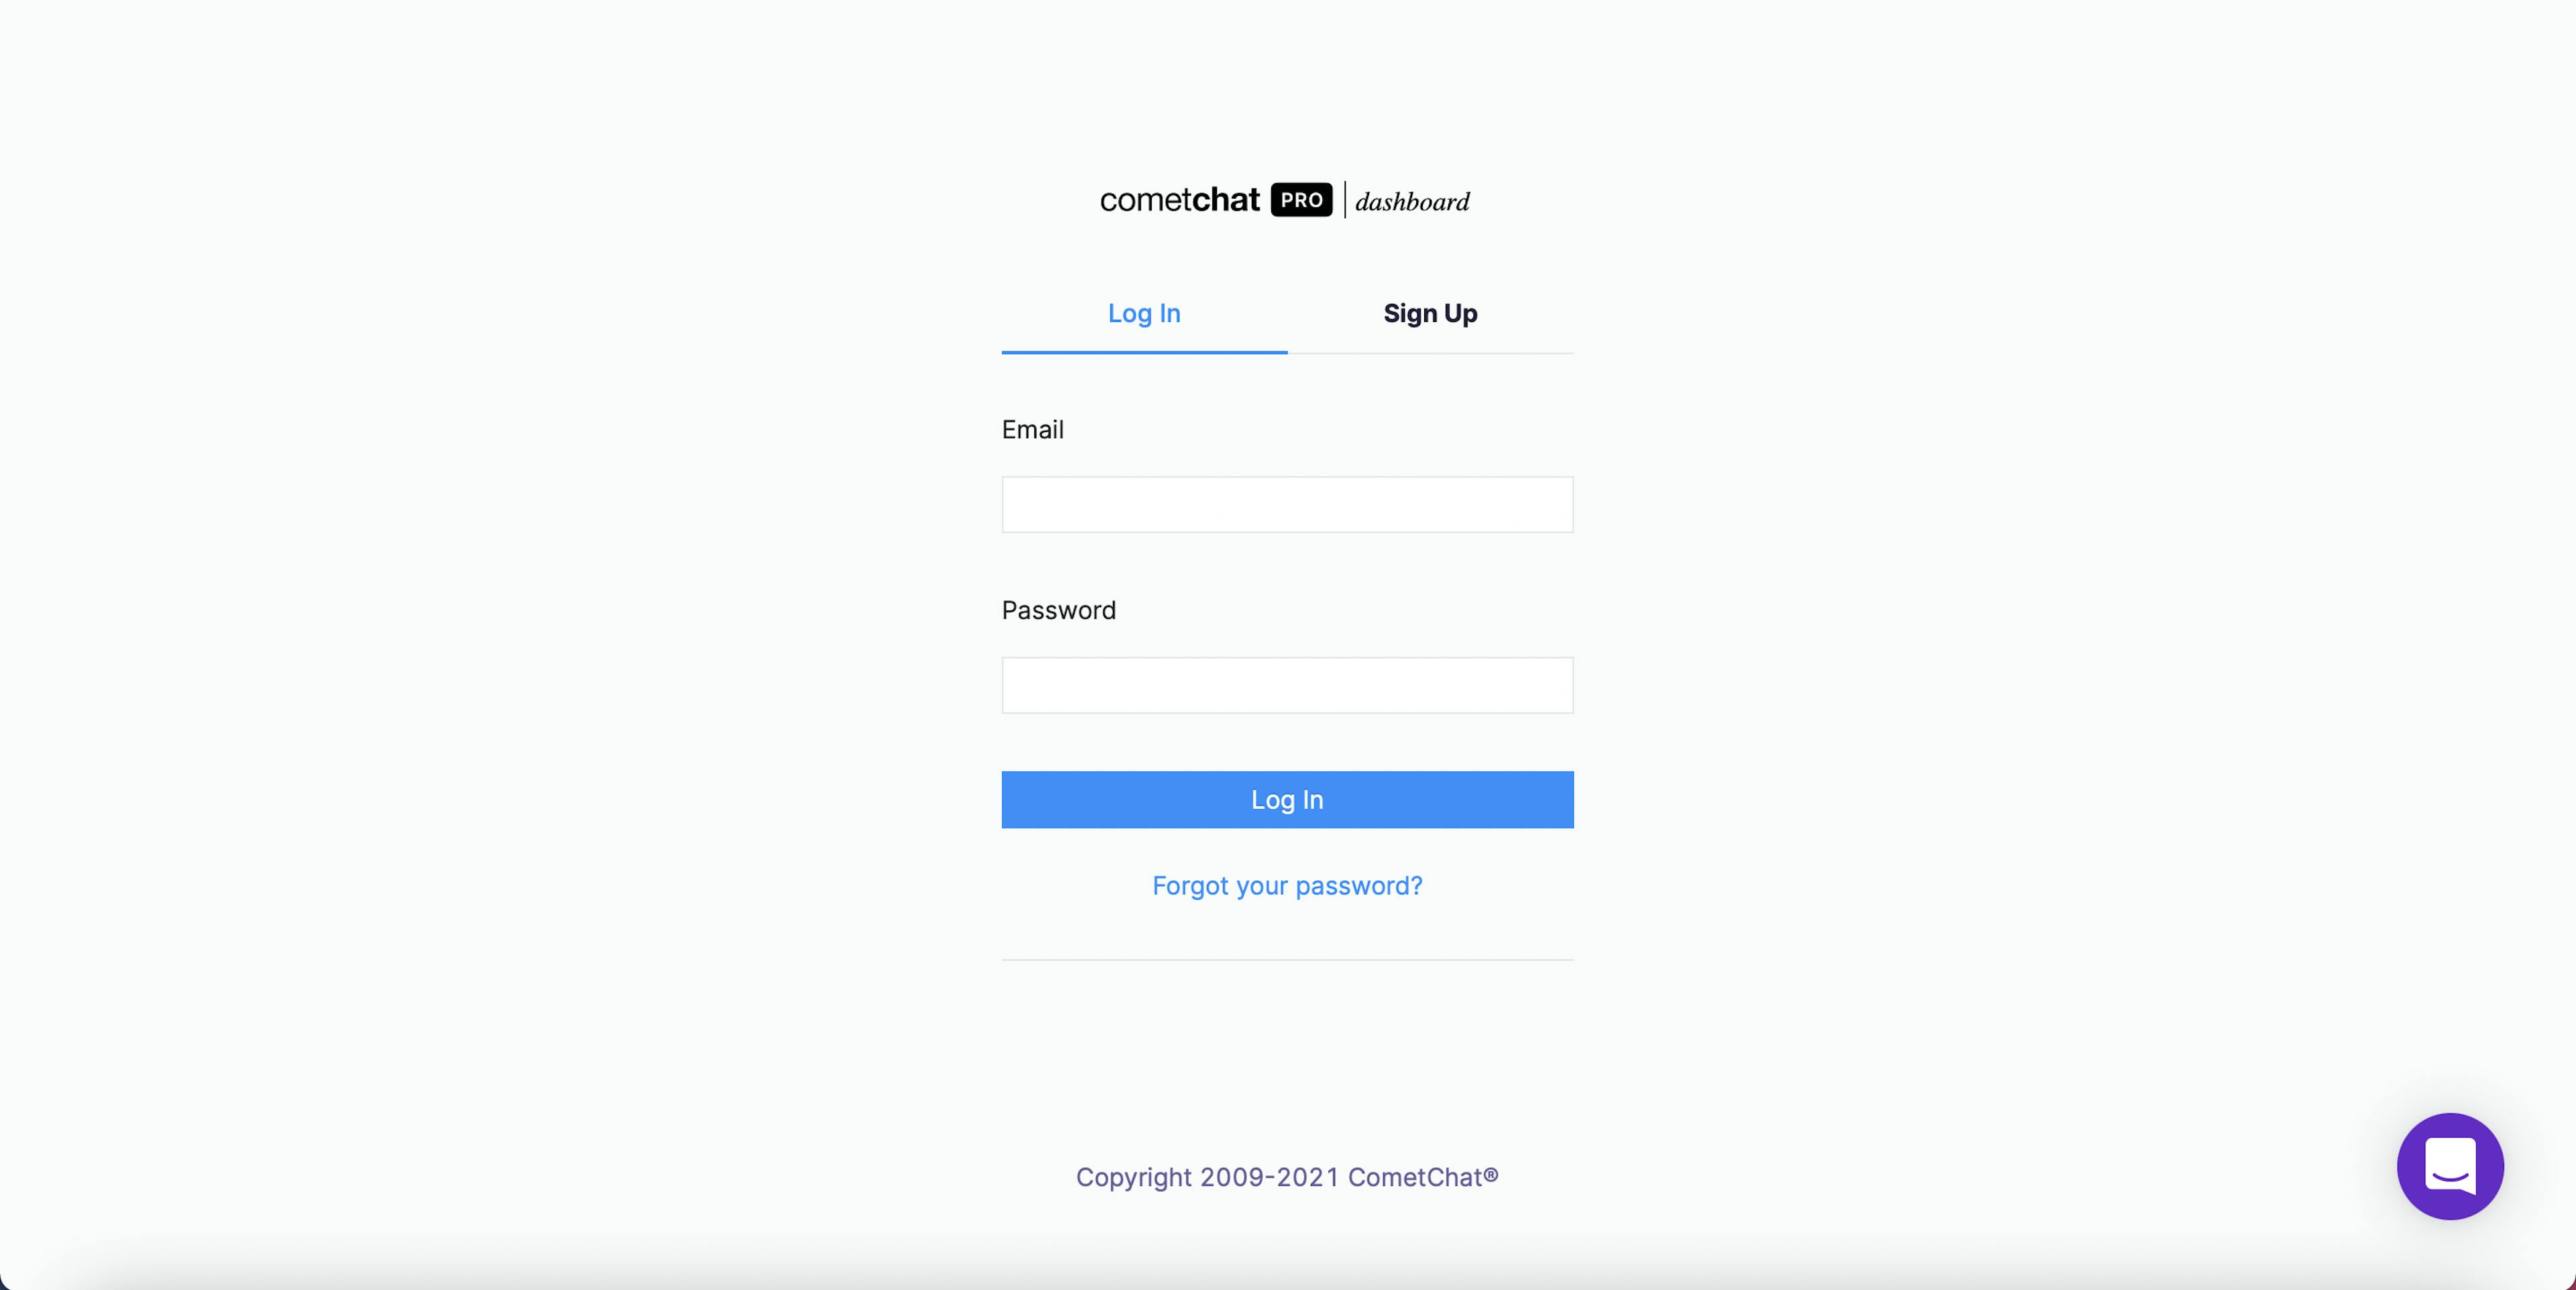 Log in to the CometChat Dashboard with your created account